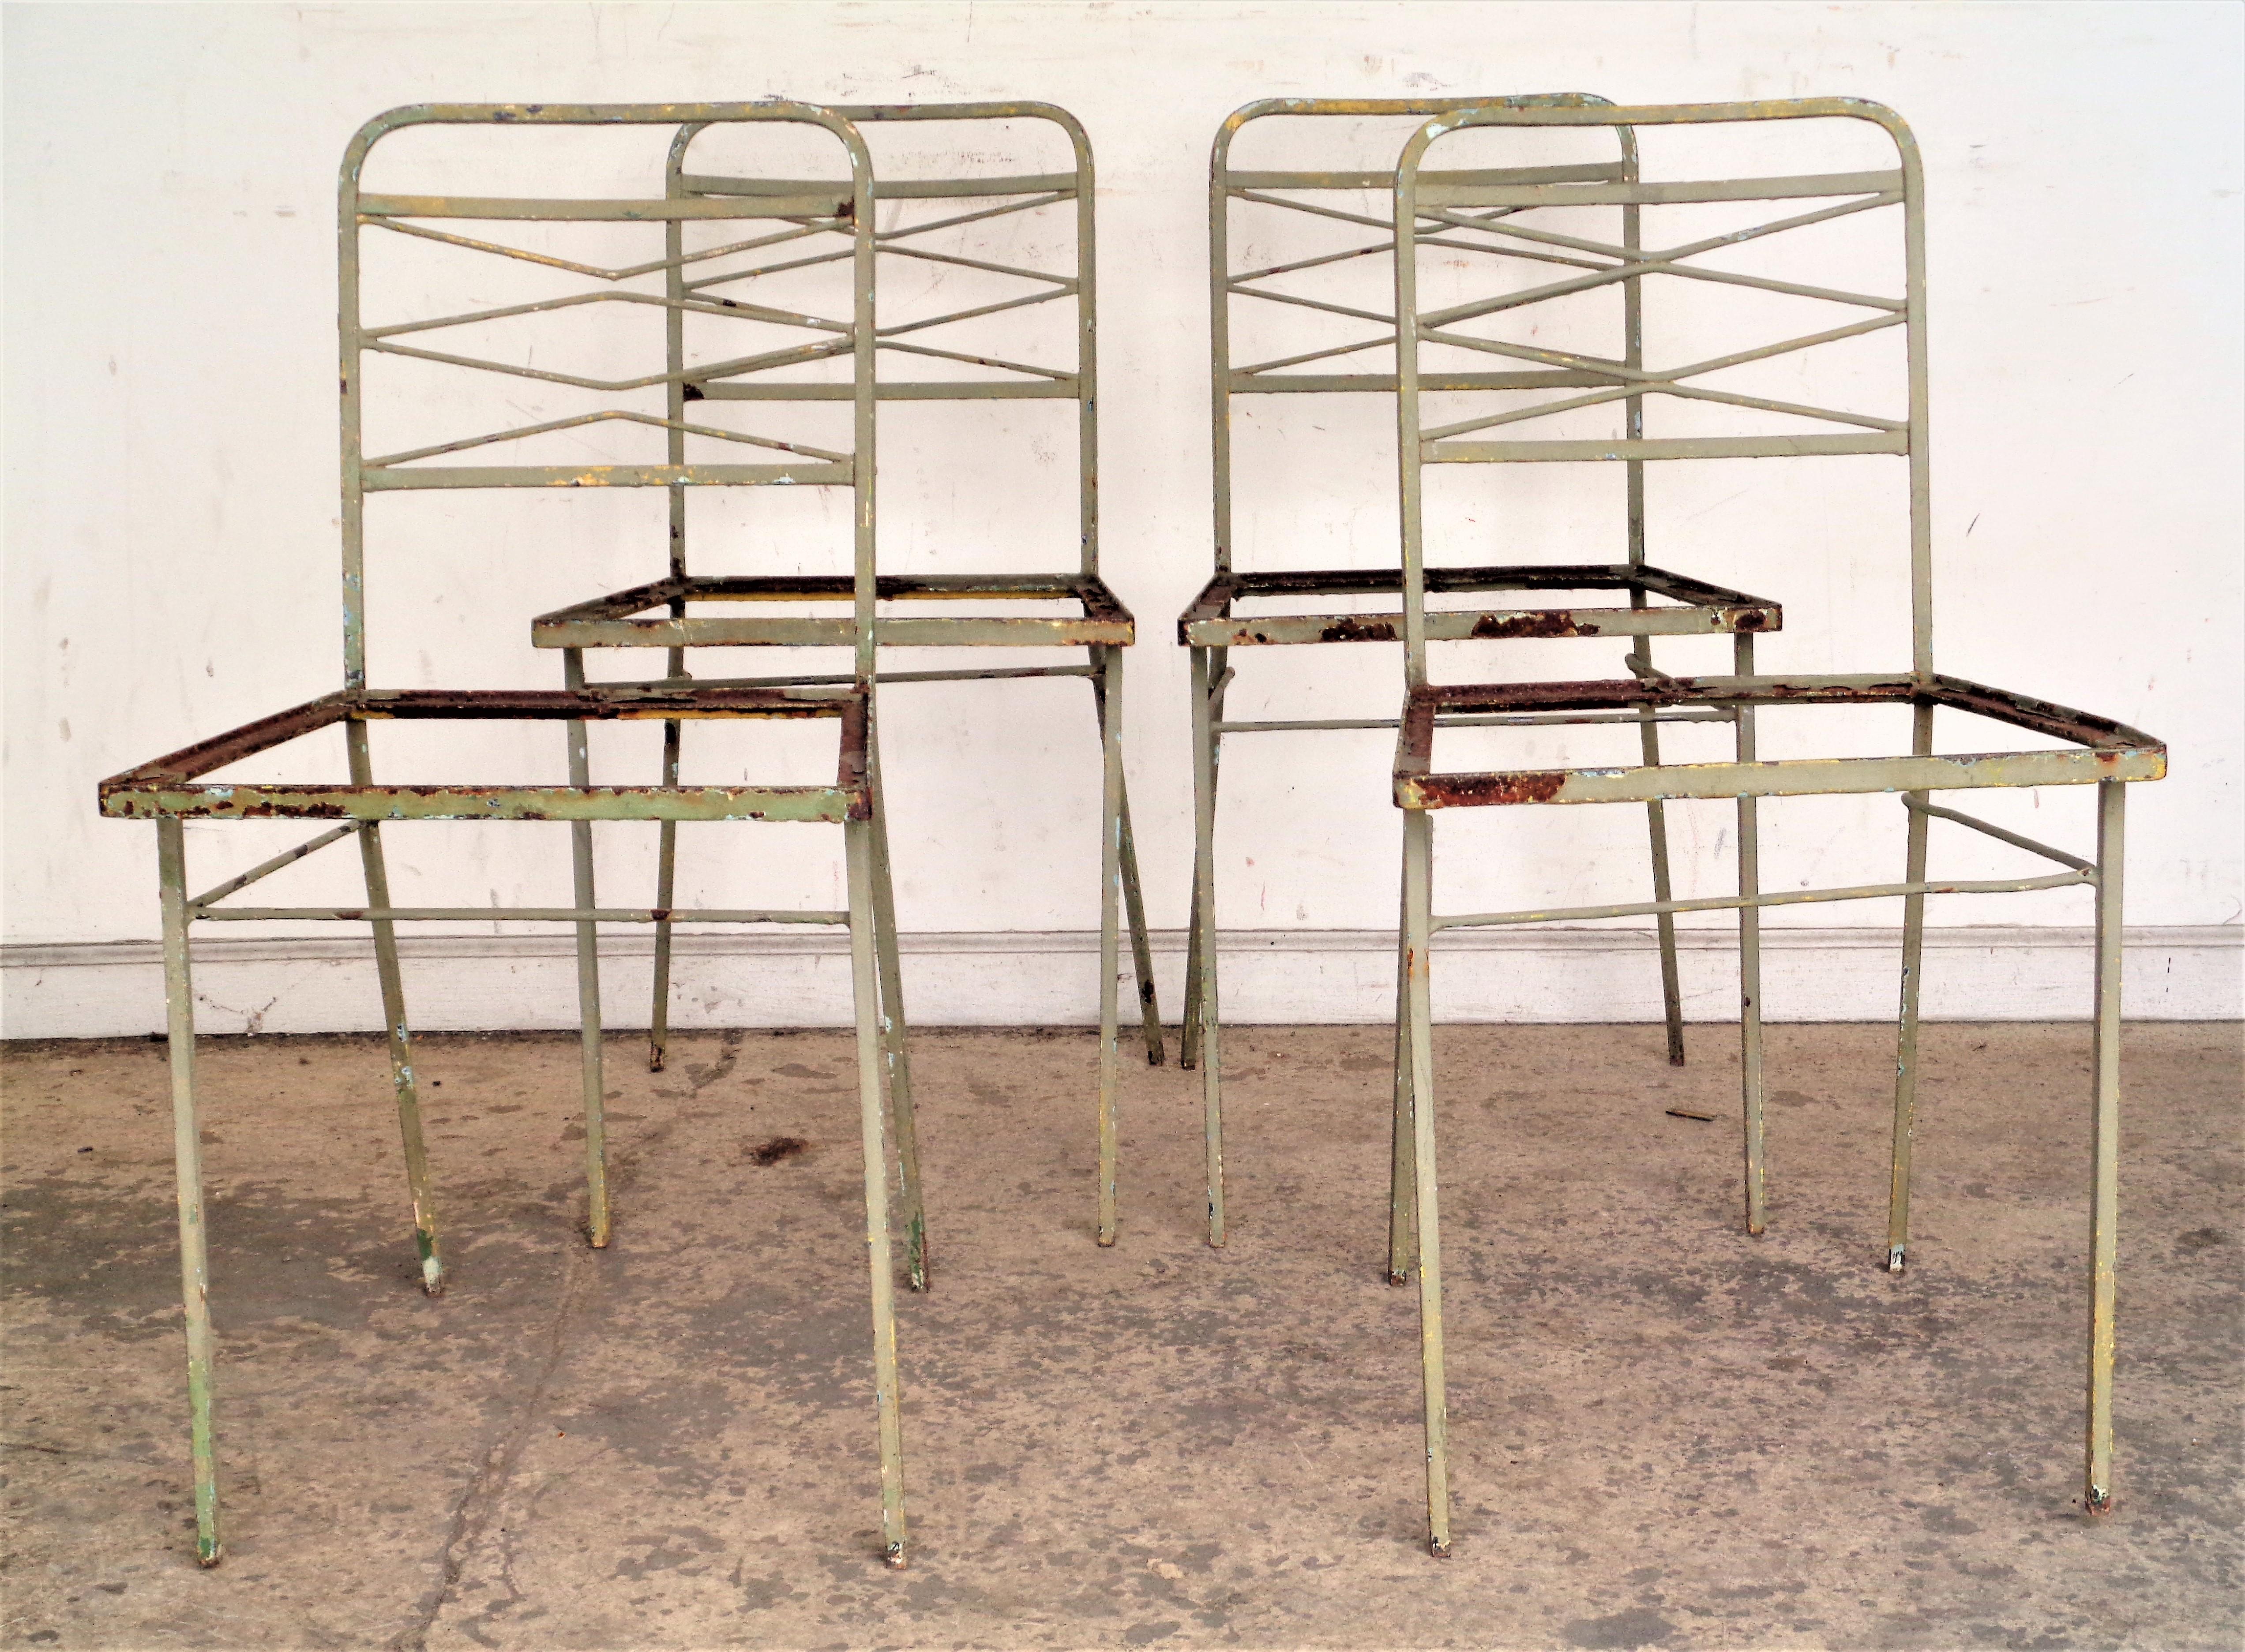 A set of four modernist wrought iron chairs in beautifully aged old worn pale sage green painted surface. Great looking. Circa 1940's. For interior or garden. Look at all pictures and read condition report in comment section.